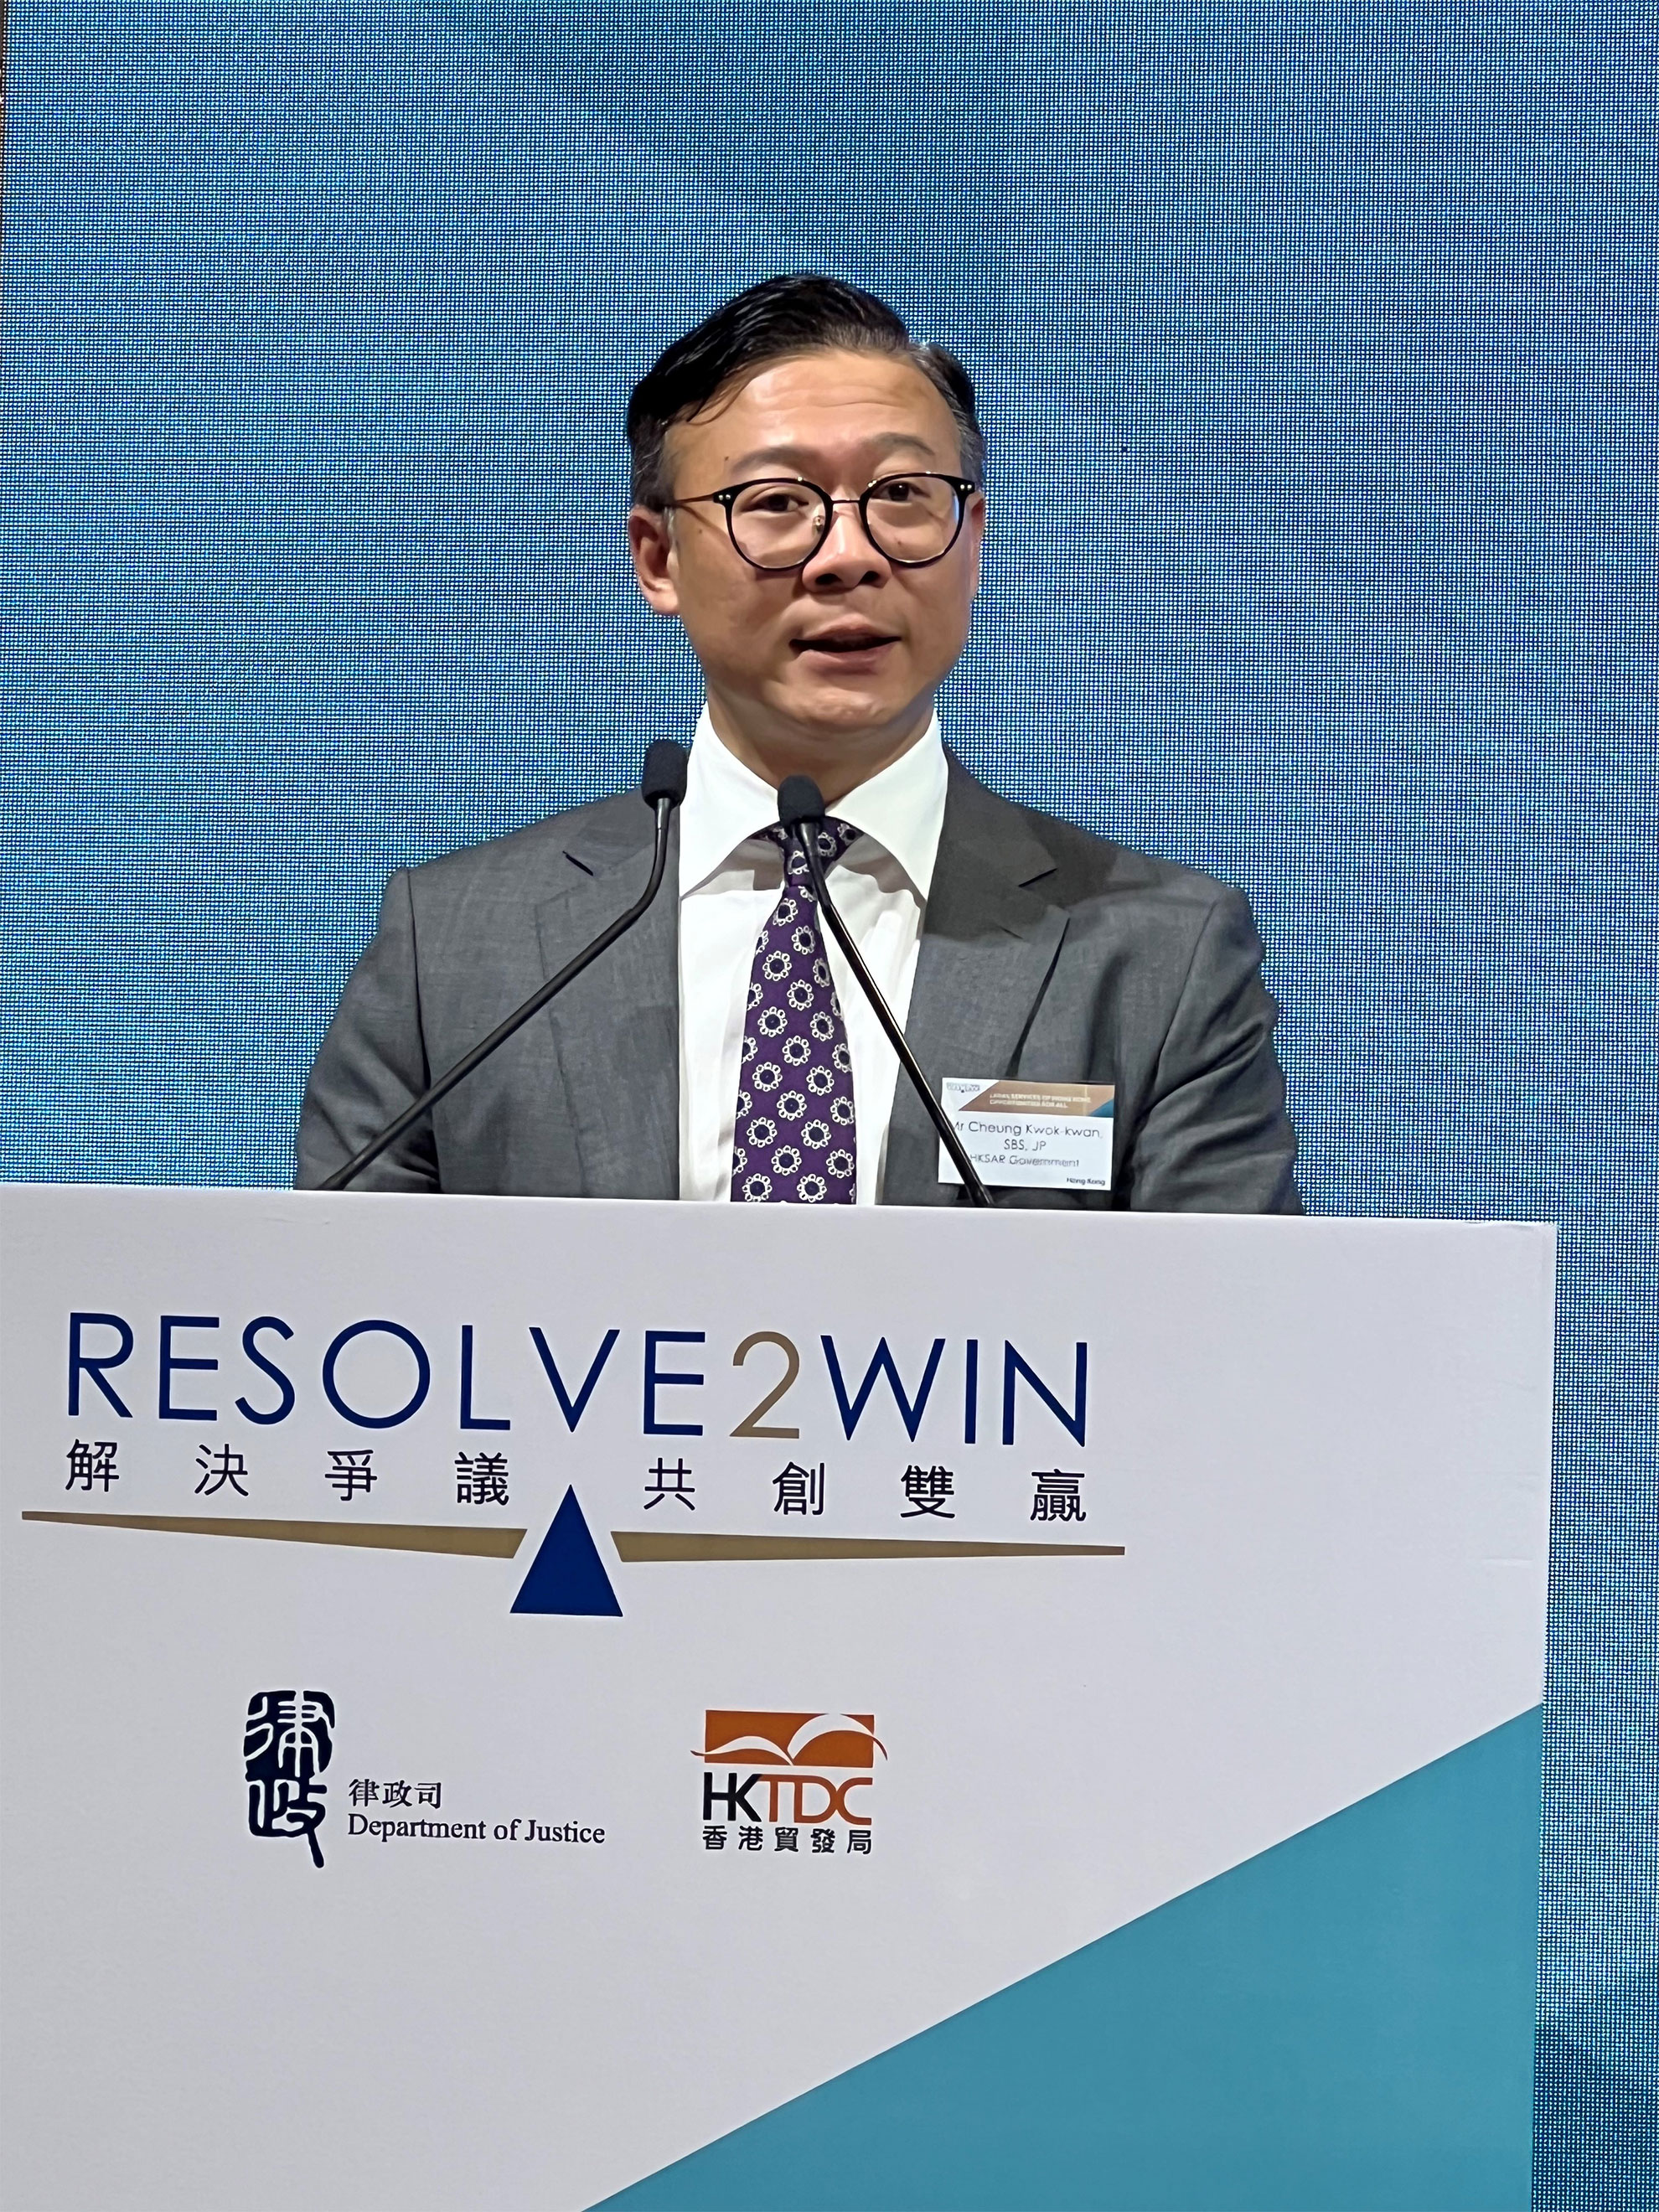 The Deputy Secretary for Justice, Mr Cheung Kwok-kwan, attended the “Resolve2Win - Legal Services of Hong Kong, Opportunities for All”, an international promotional campaign co-organised by the Department of Justice and the Hong Kong Trade Development Council, in Bangkok, Thailand, today (March 16). Photo shows Mr Cheung delivering his opening remarks.